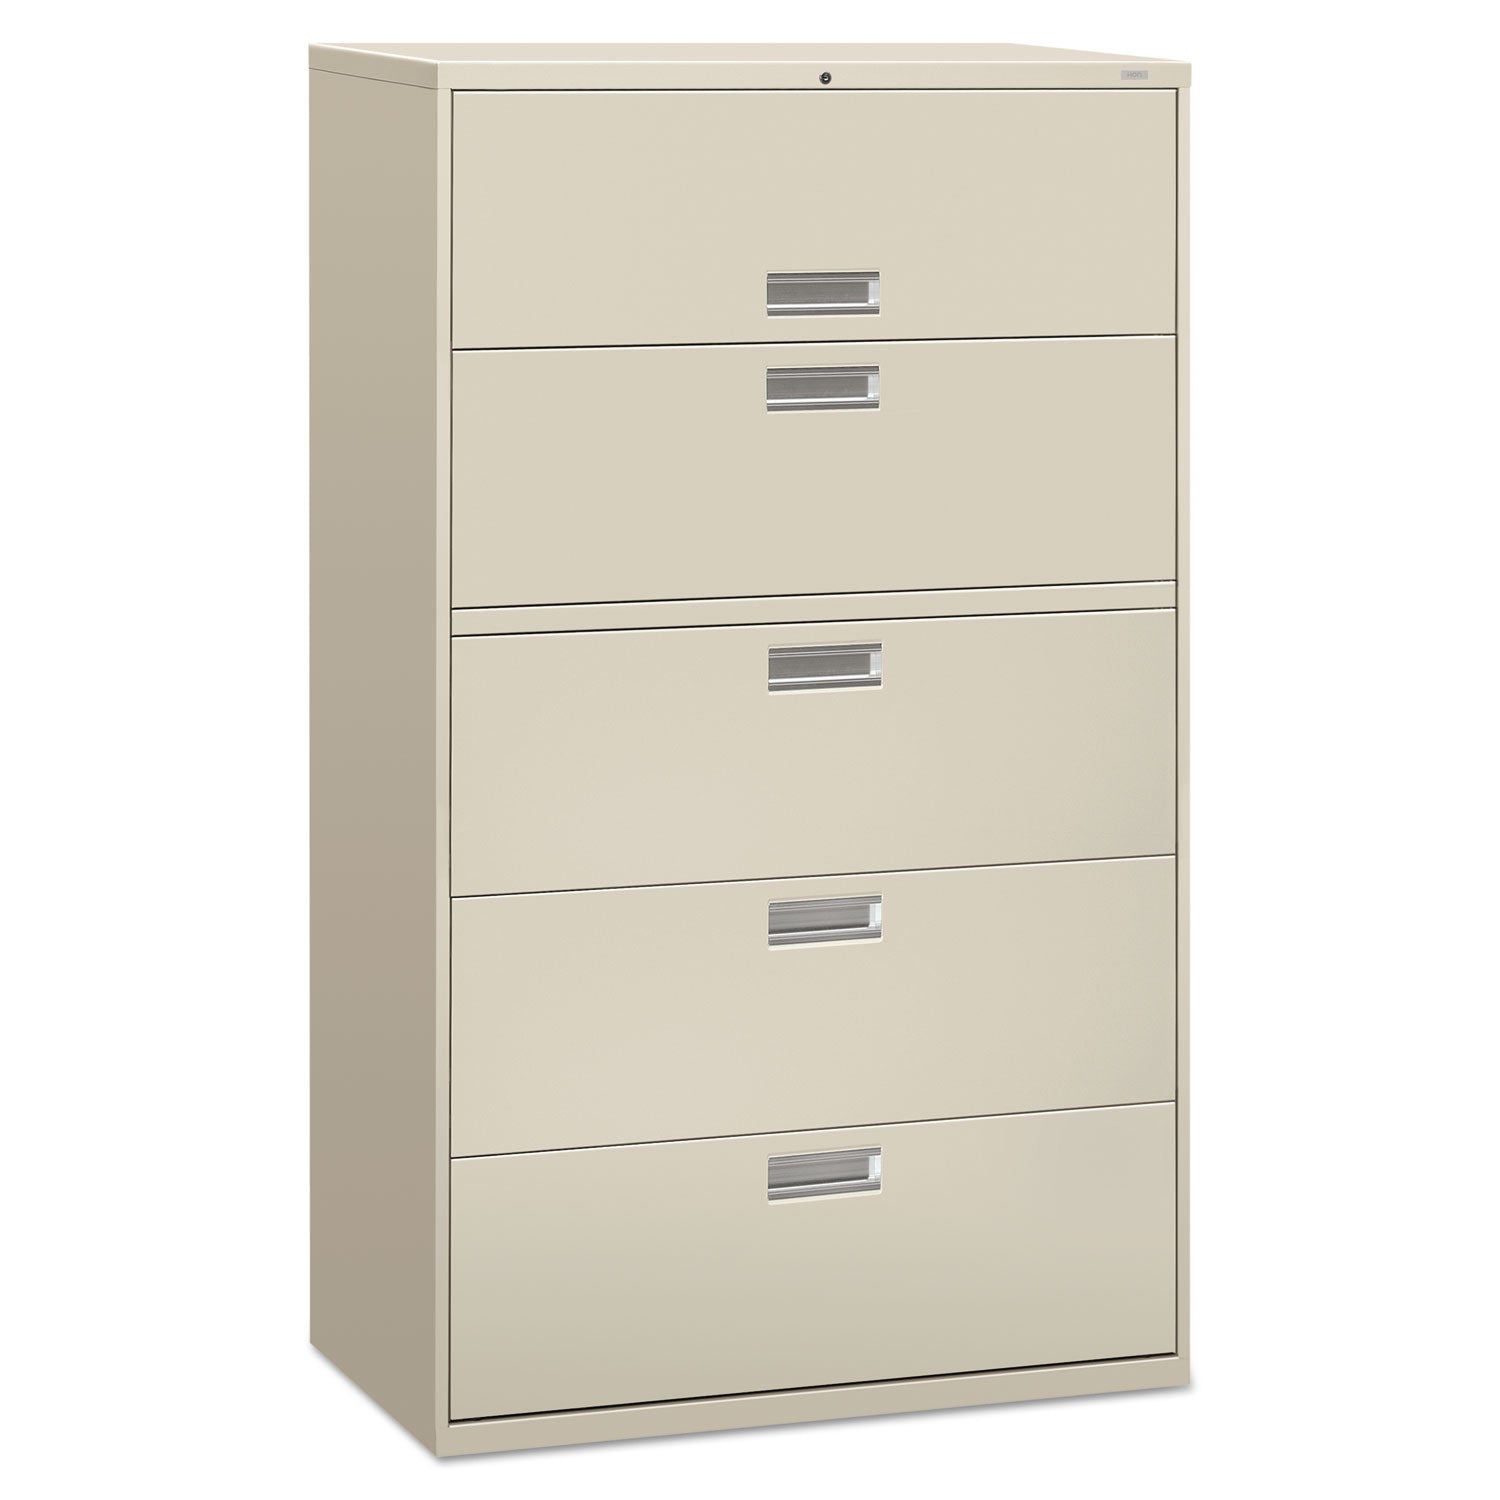 Brigade 600 Series Lateral File, 4 Legal/Letter-Size File Drawers, 1 Roll-Out File Shelf, Light Gray, 42" x 18" x 64.25 - 